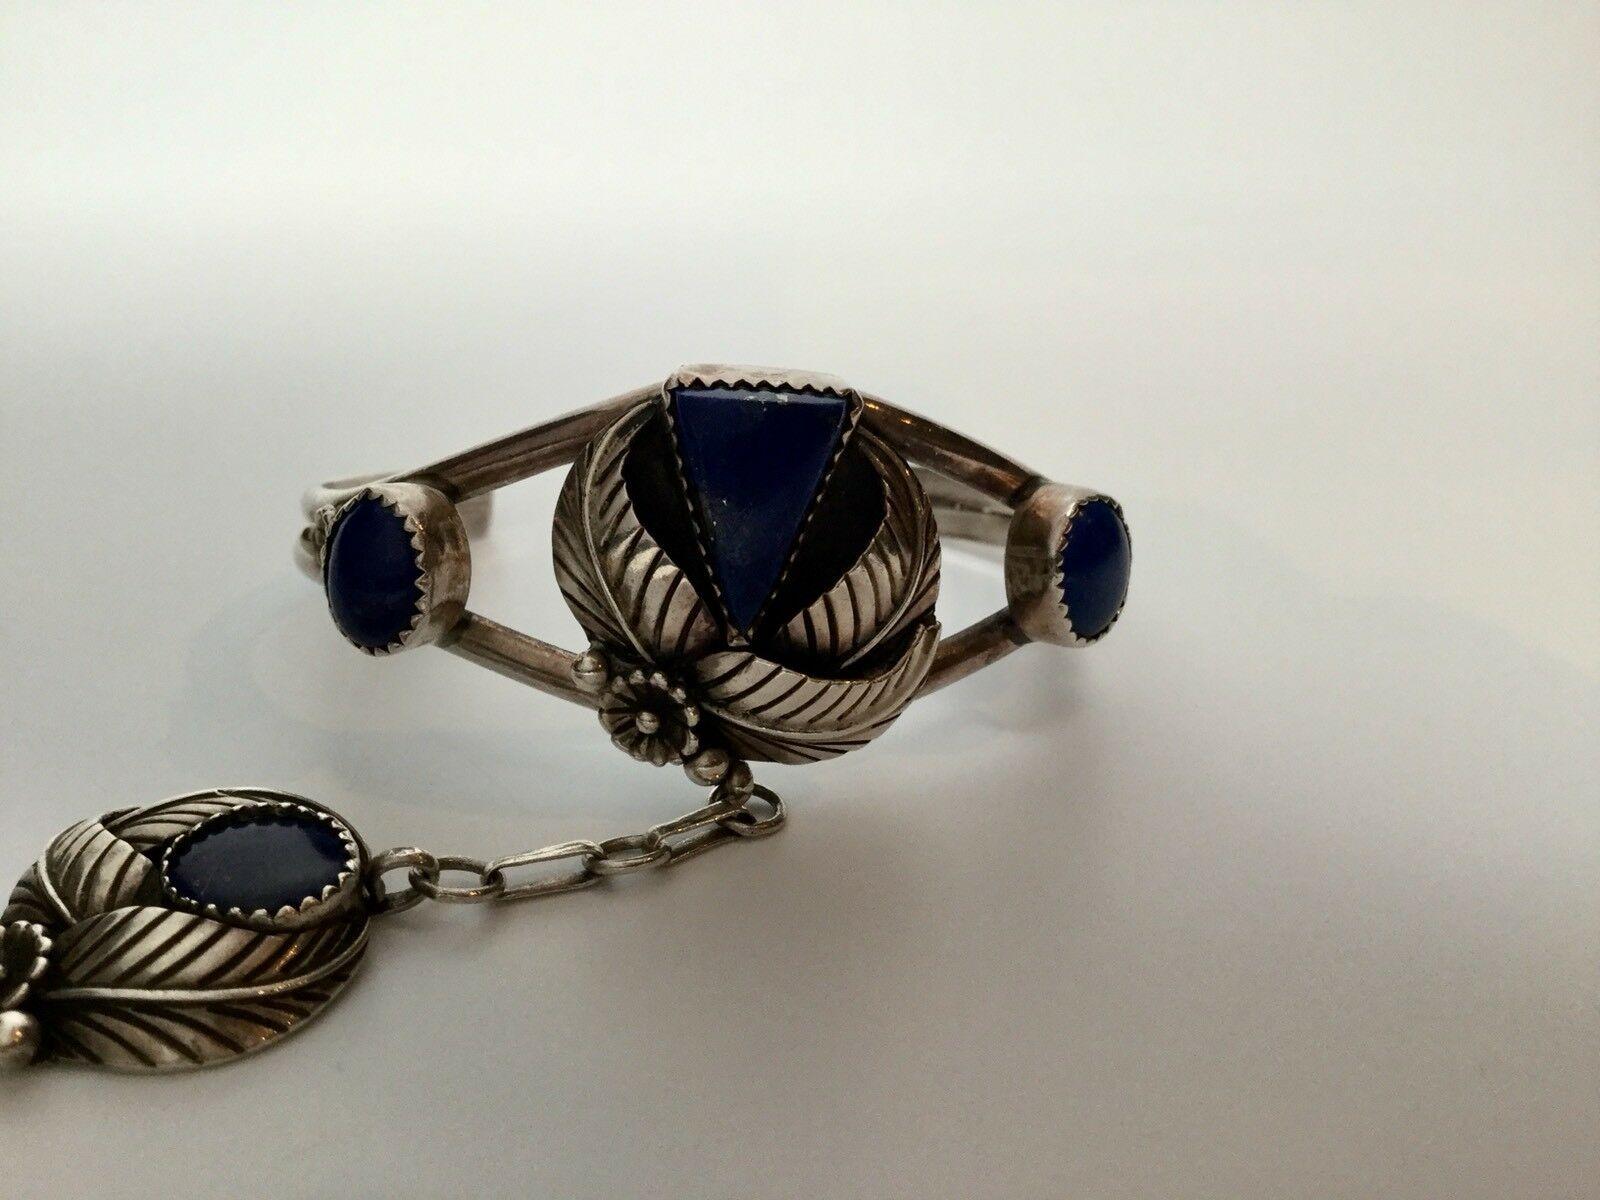 Native American Lapis Slave Bracelet

Marked: Sterling
Signed: W

Measurements:
Cuff:
5 1/4” end to end
~2 7/16” wide
widest end: ~1”
narrowest end: 1/4”

Stones:
9 mm x 7mm
10 mm x 7 mm
Triangle stone: 15 mm x 10 mm

Middle Pendant:
23 mm x 20